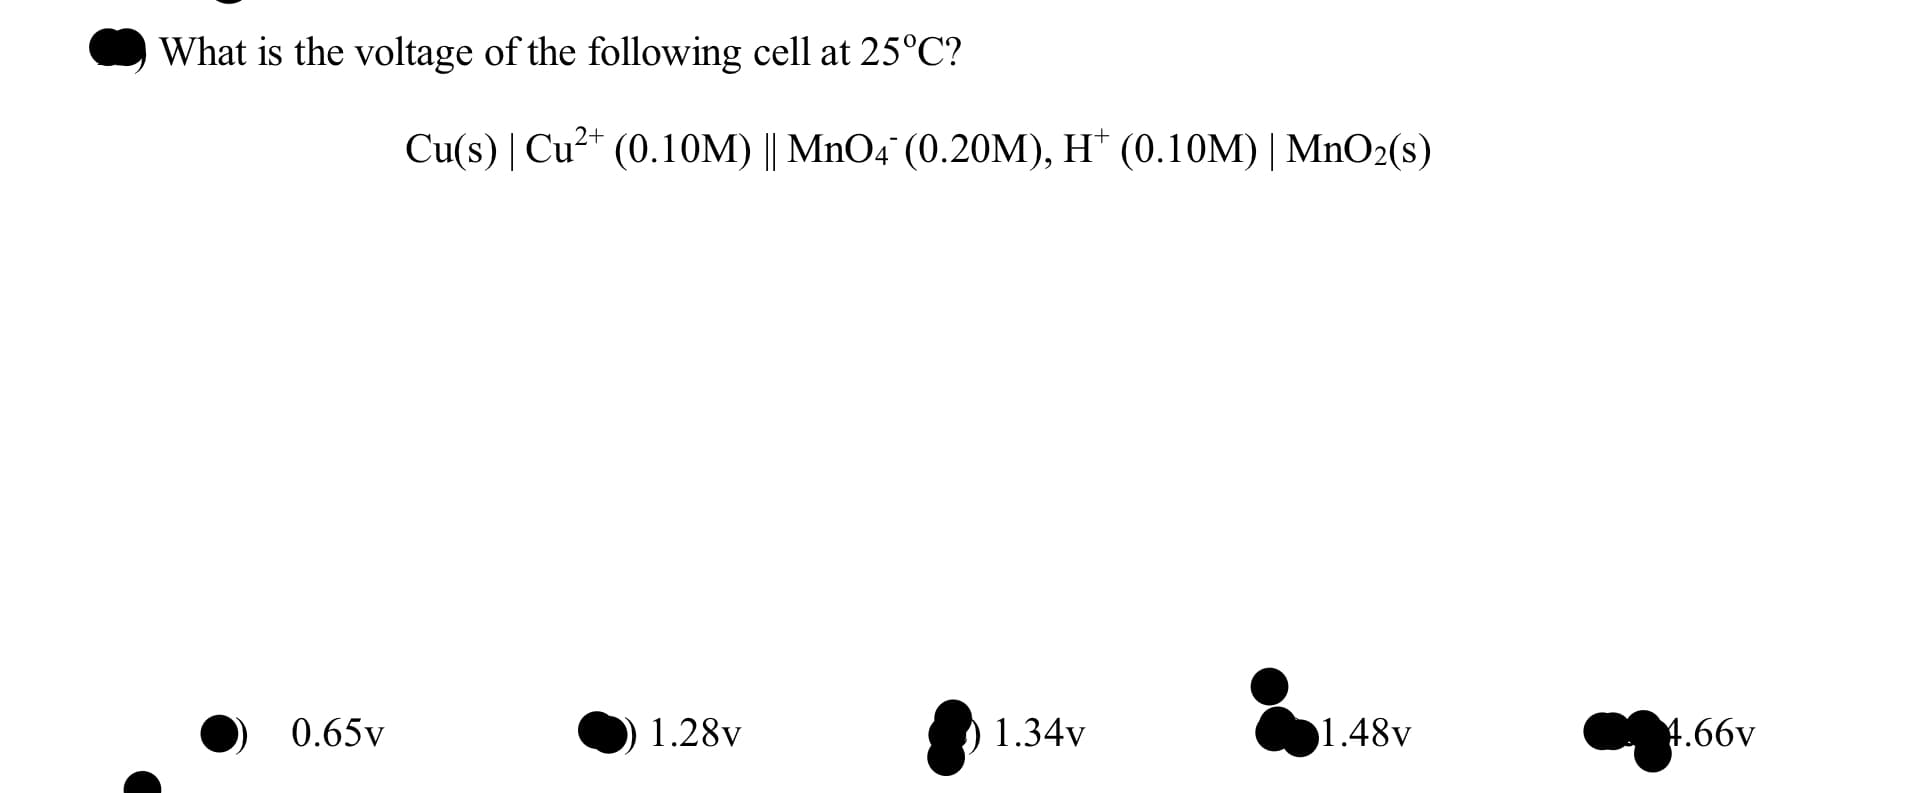 What is the voltage of the following cell at 25°C?
Cu(s) | Cu²* (0.10M) || MnO4° (0.20M), H* (0.10M) | MnO2(s)
0.65v
1.28v
1.34v
1.48v
4.66v
